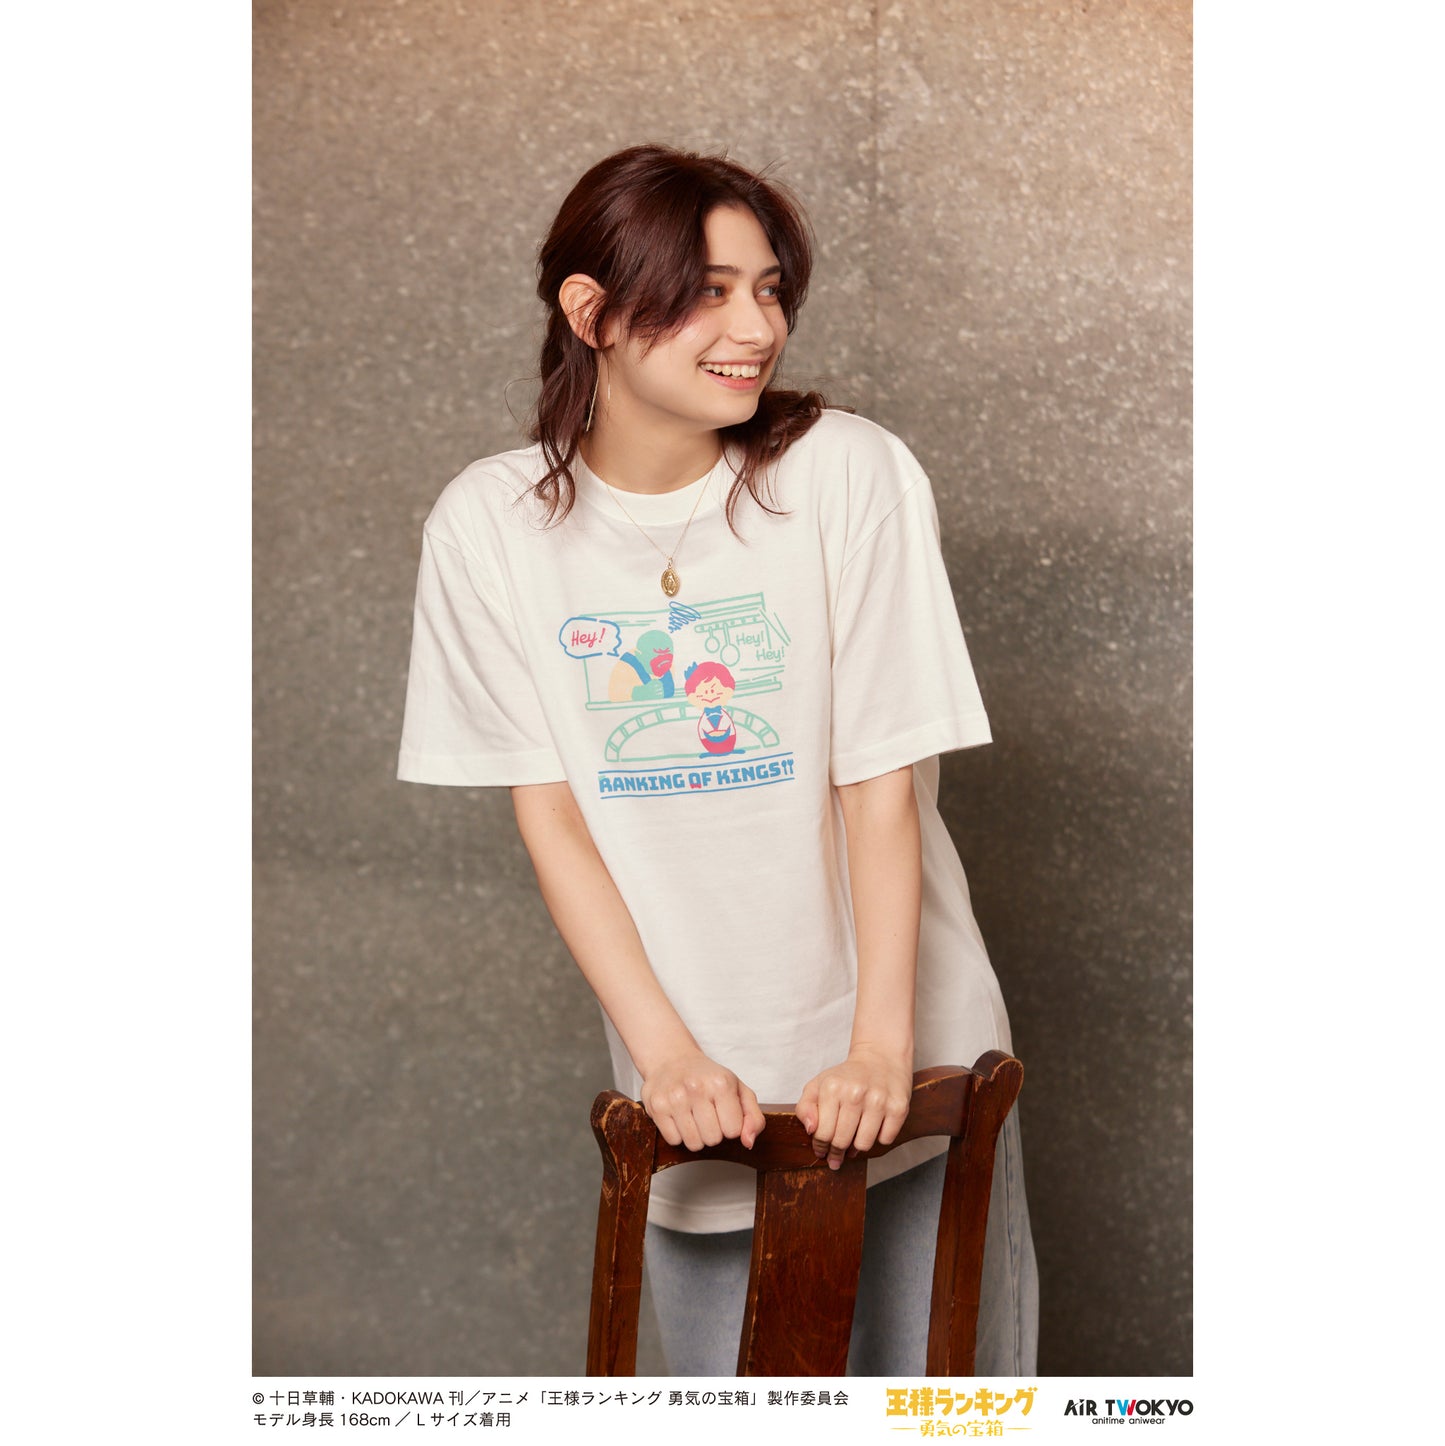 “Ranking of Kings: The Treasure Chest of Courage” scene illustration T-shirt 2